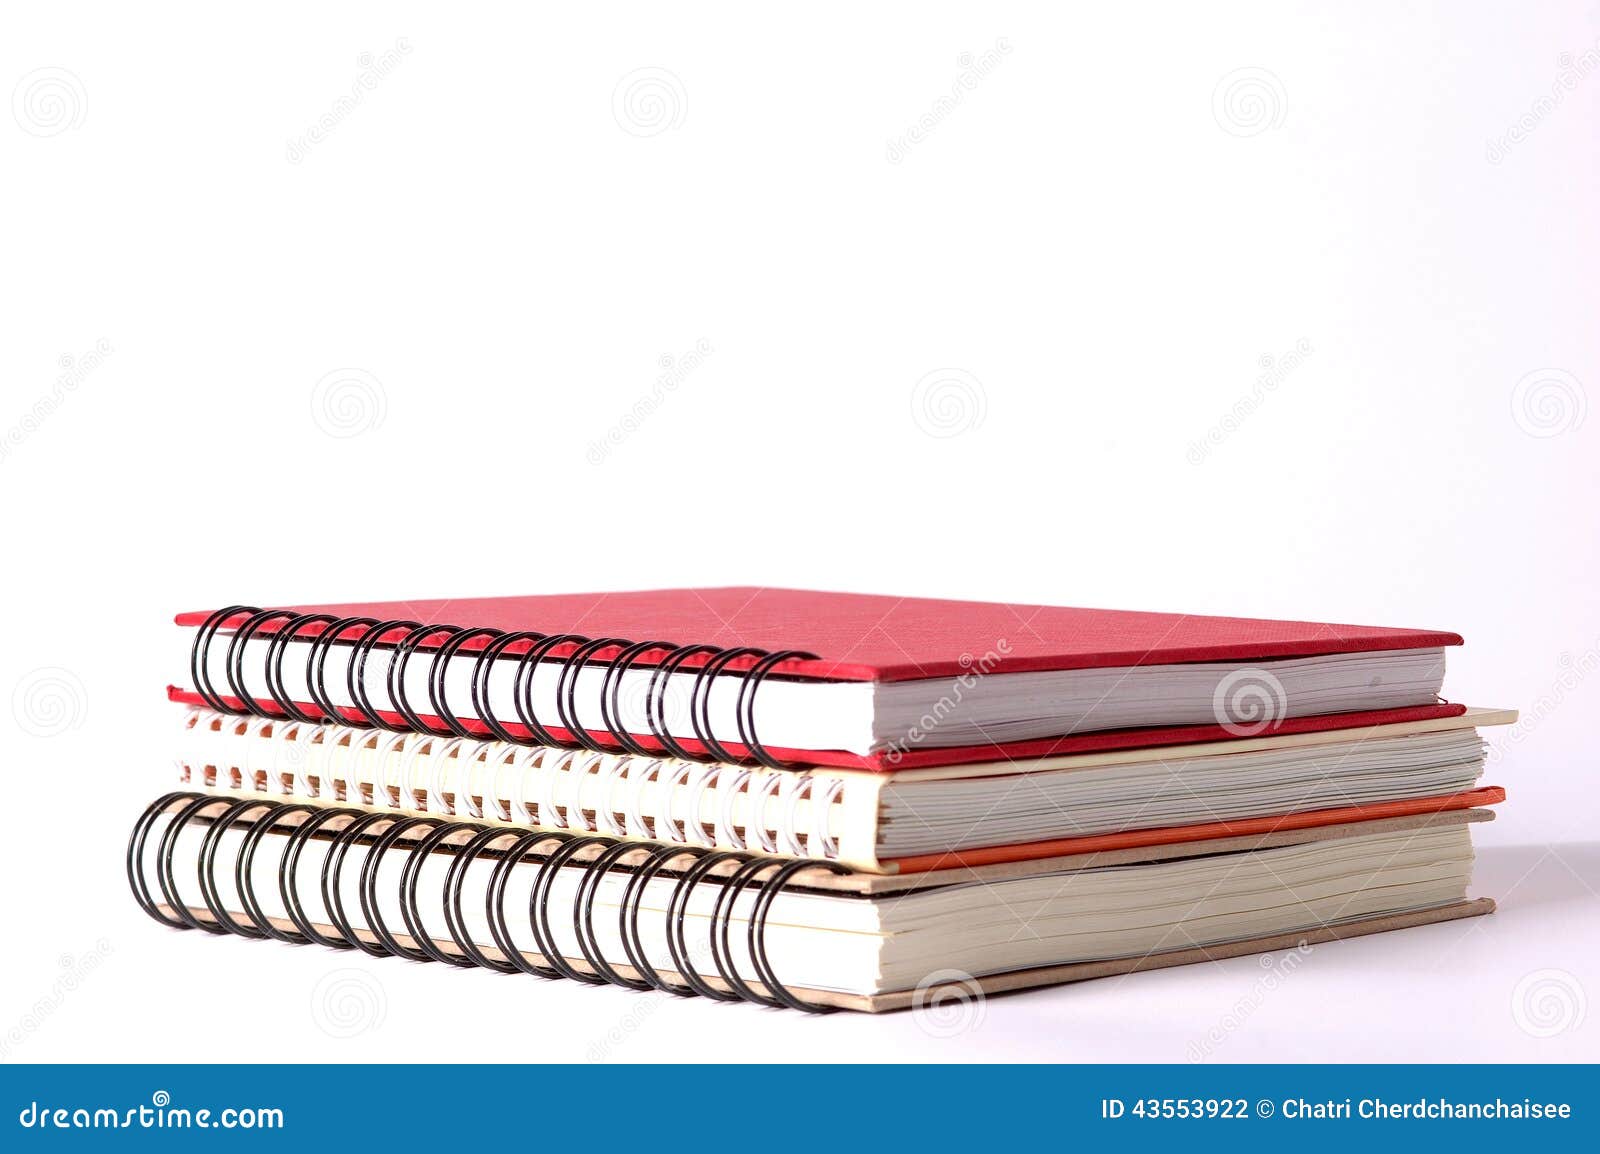 Spiral notebooks isolated stock photo. Image of business - 43553922